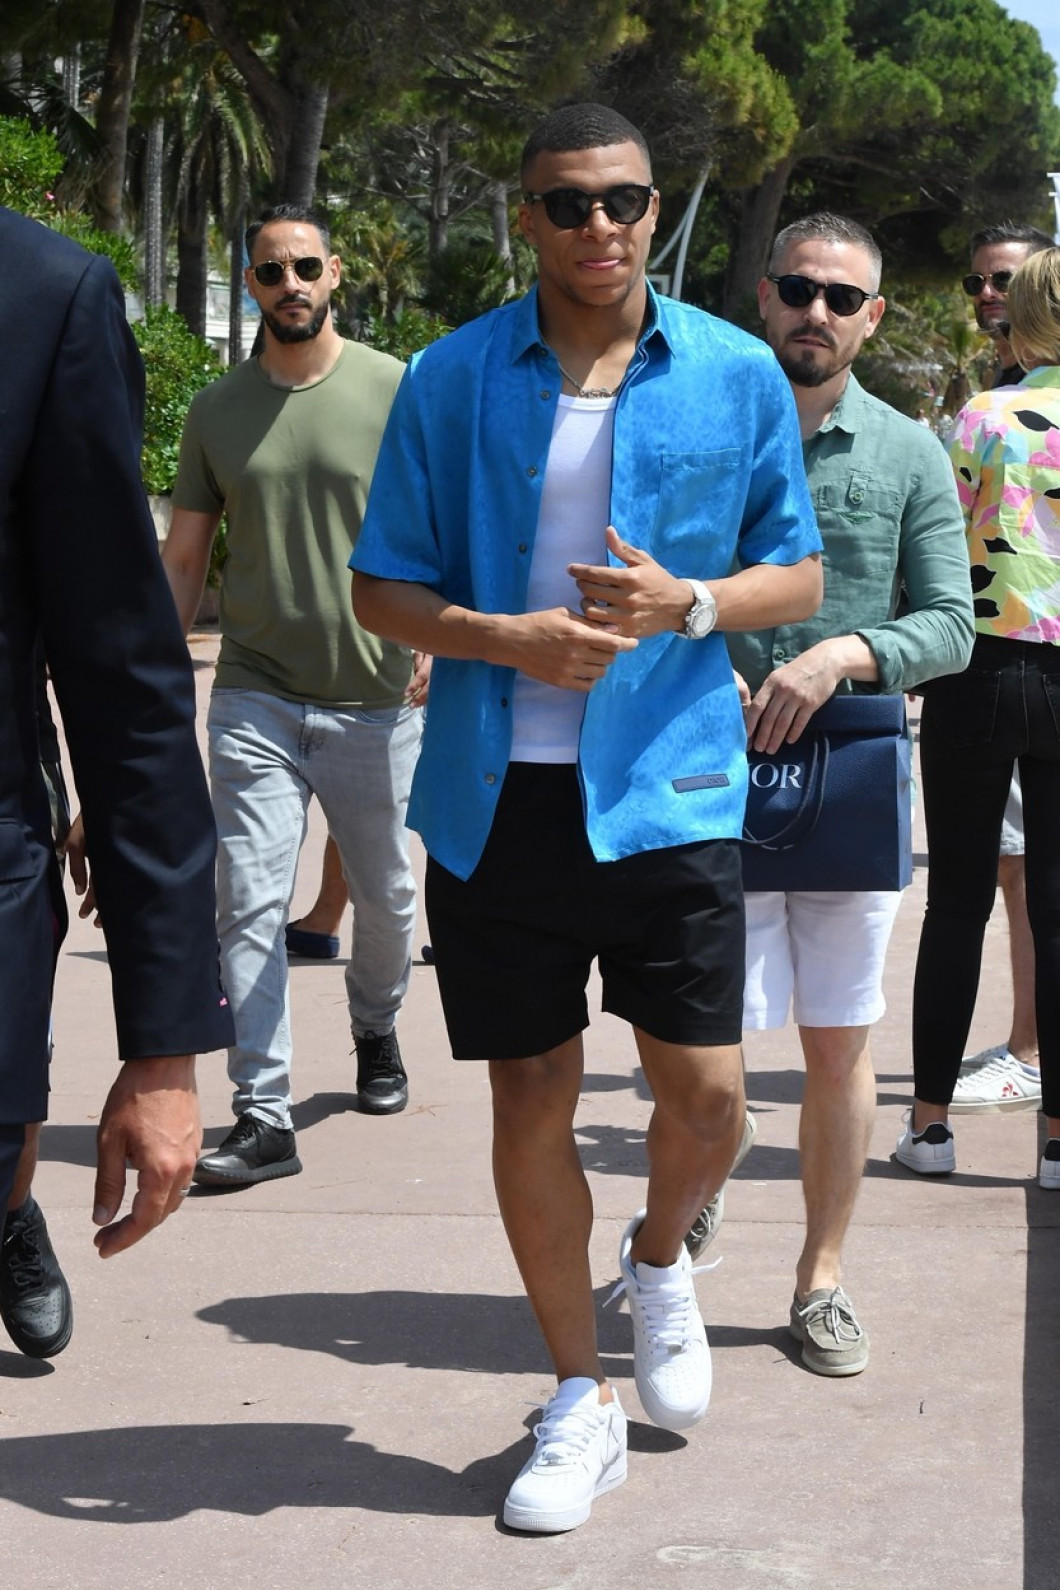 Kylian Mbappè at the 75th Annual Cannes Film Festival 2022